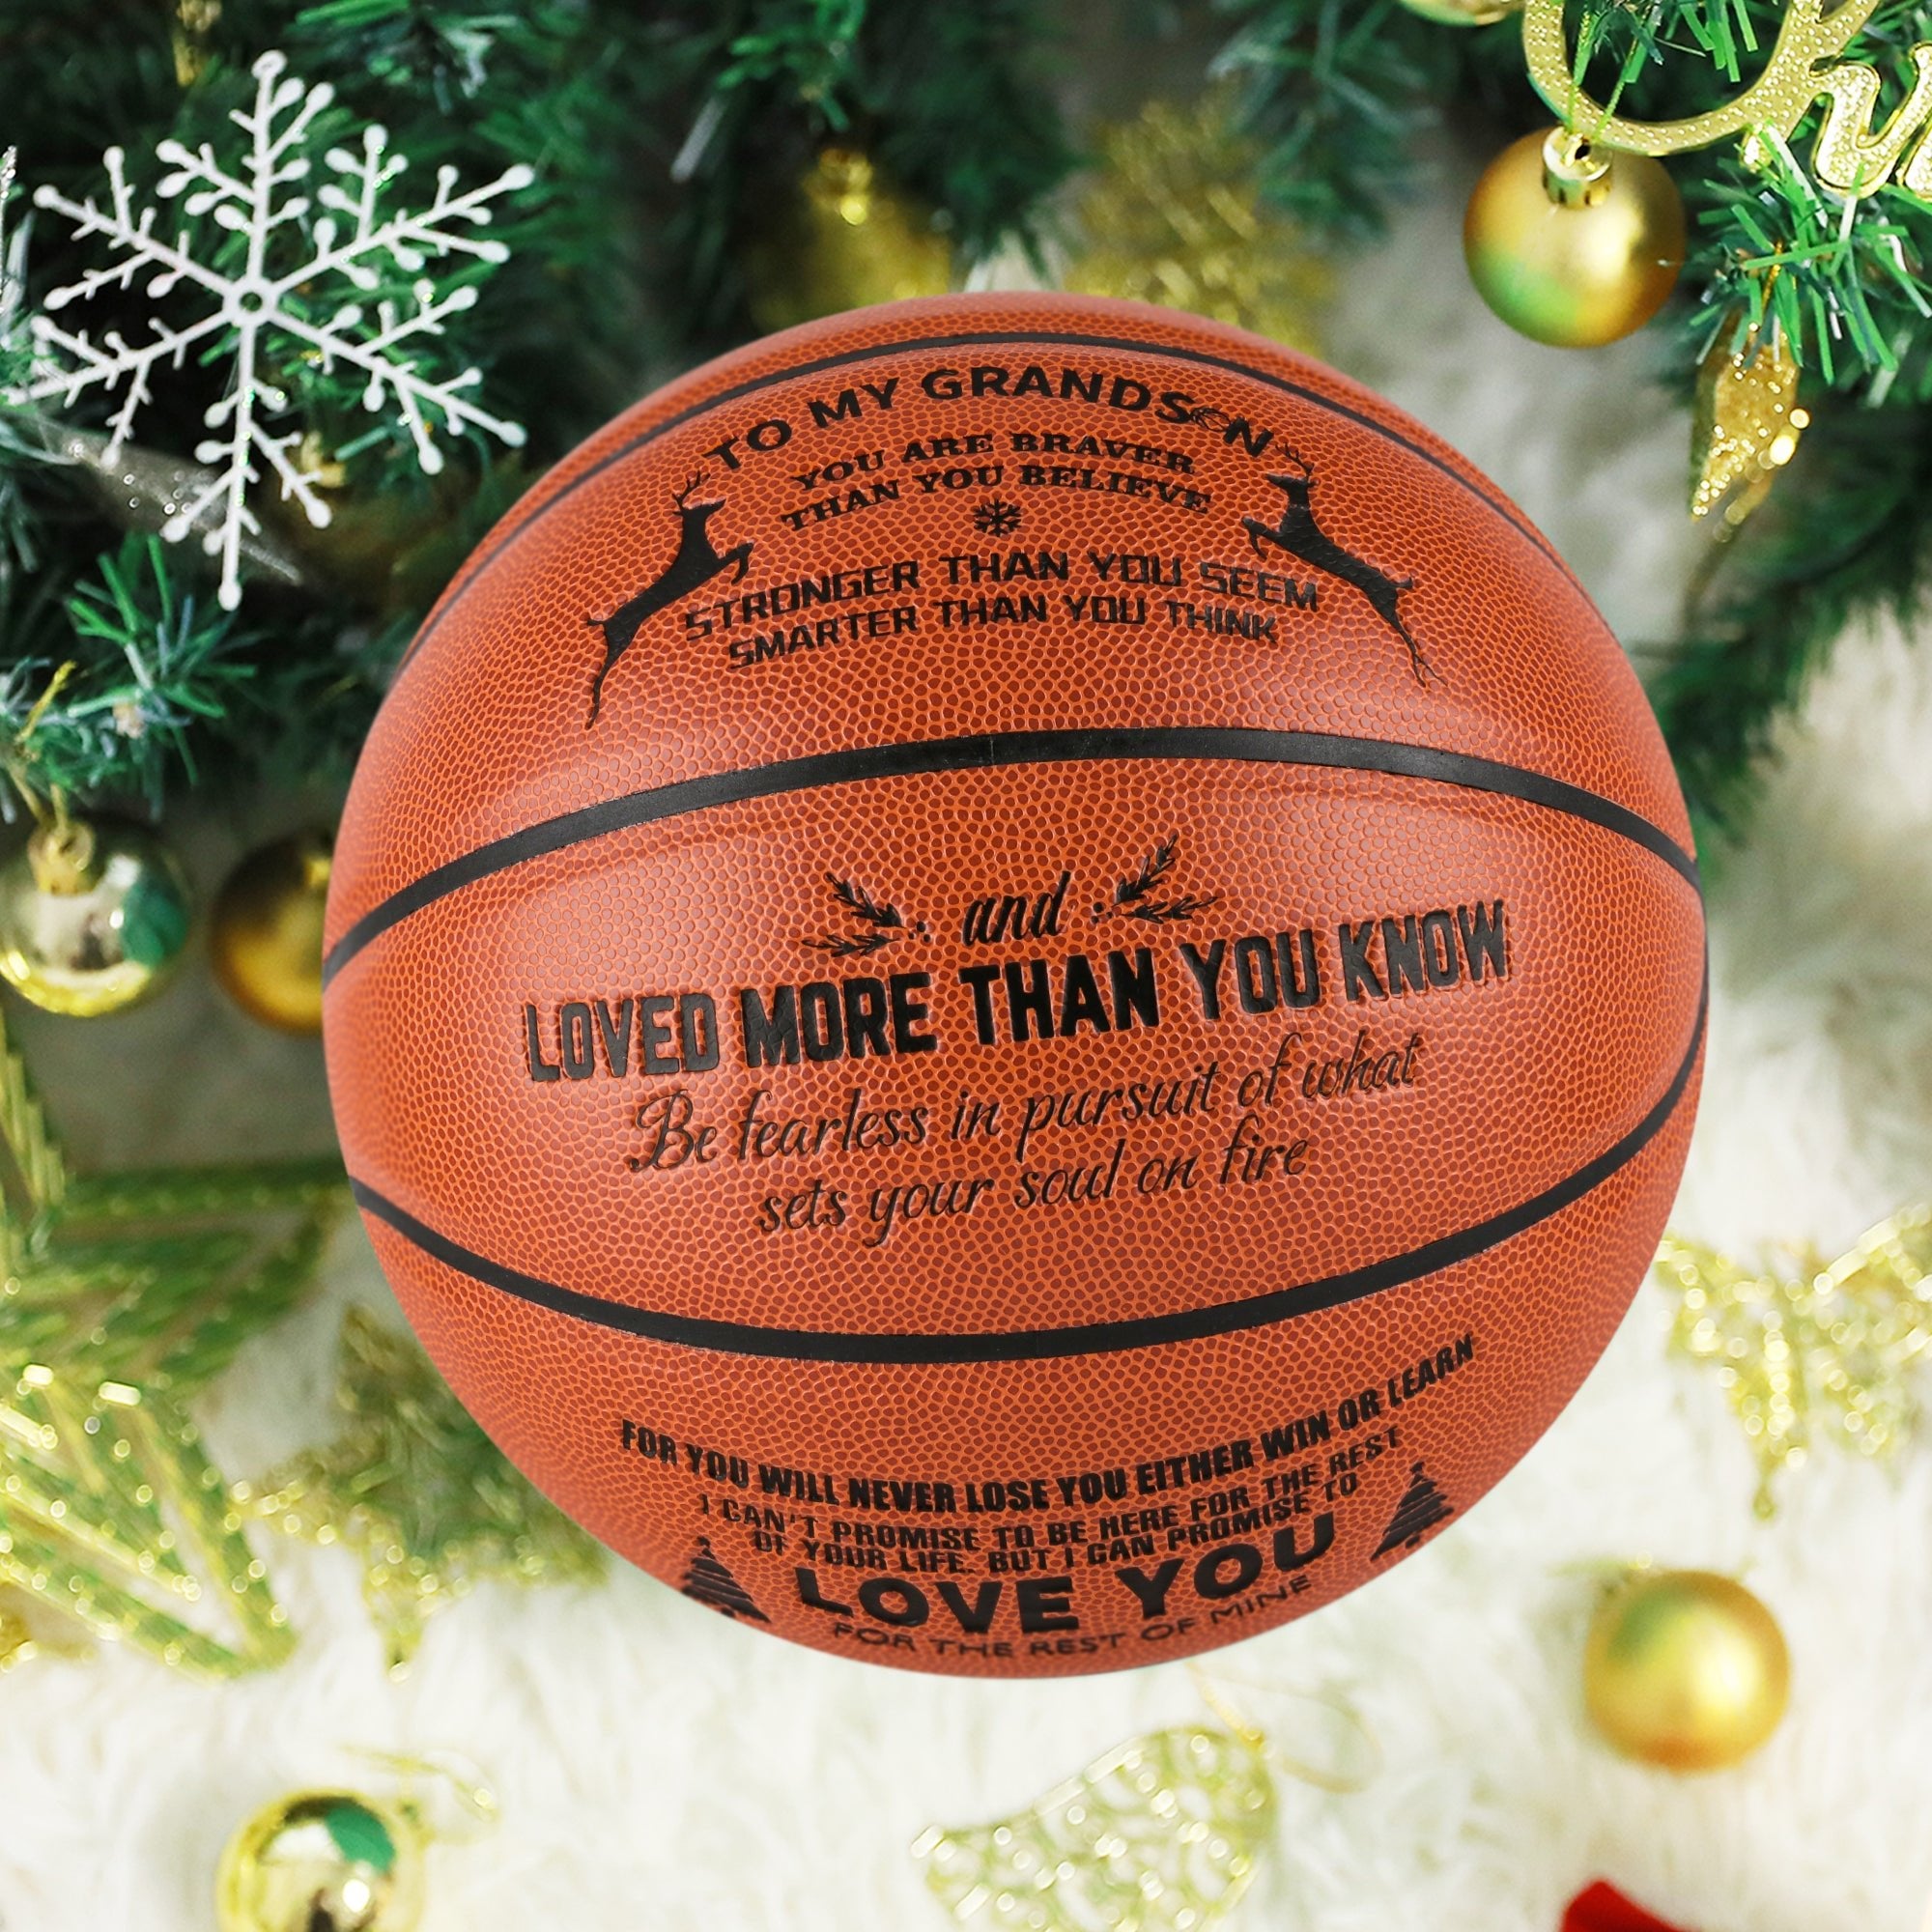 Personalized Letter Basketball For Grandson, Basketball Indoor/Outdoor Game Ball For Boy, Christmas Gift For Grandson,Brown - Family Watchs